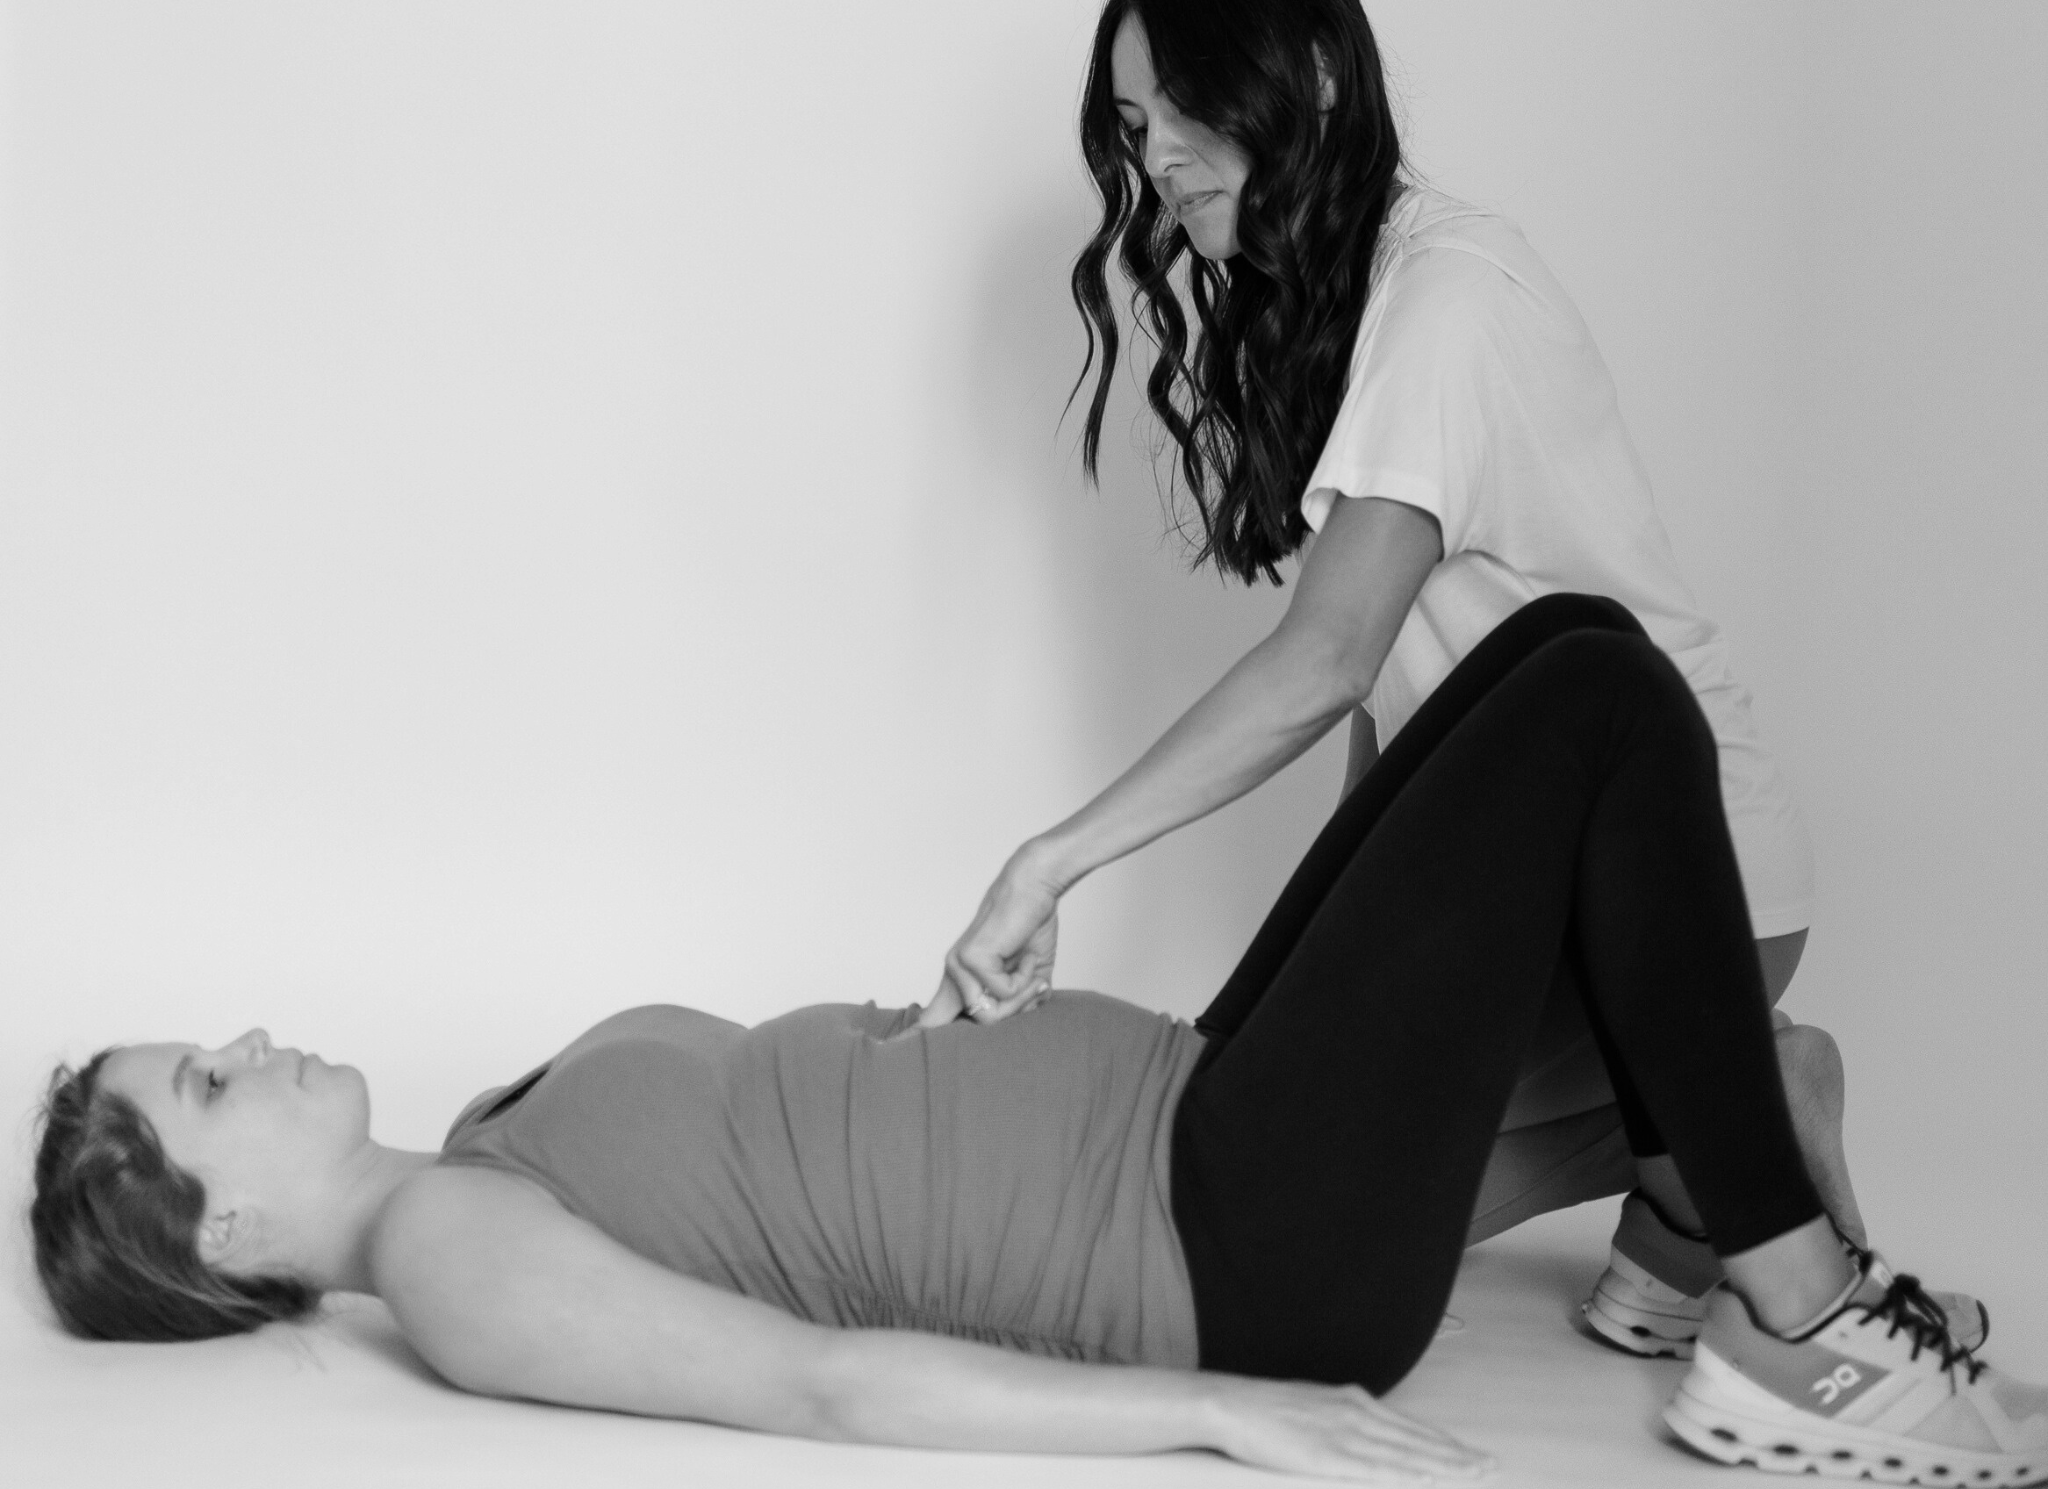 Pregnant woman lays on ground, physical therapist kneels next to her and checks her abdomen for diastasis recti